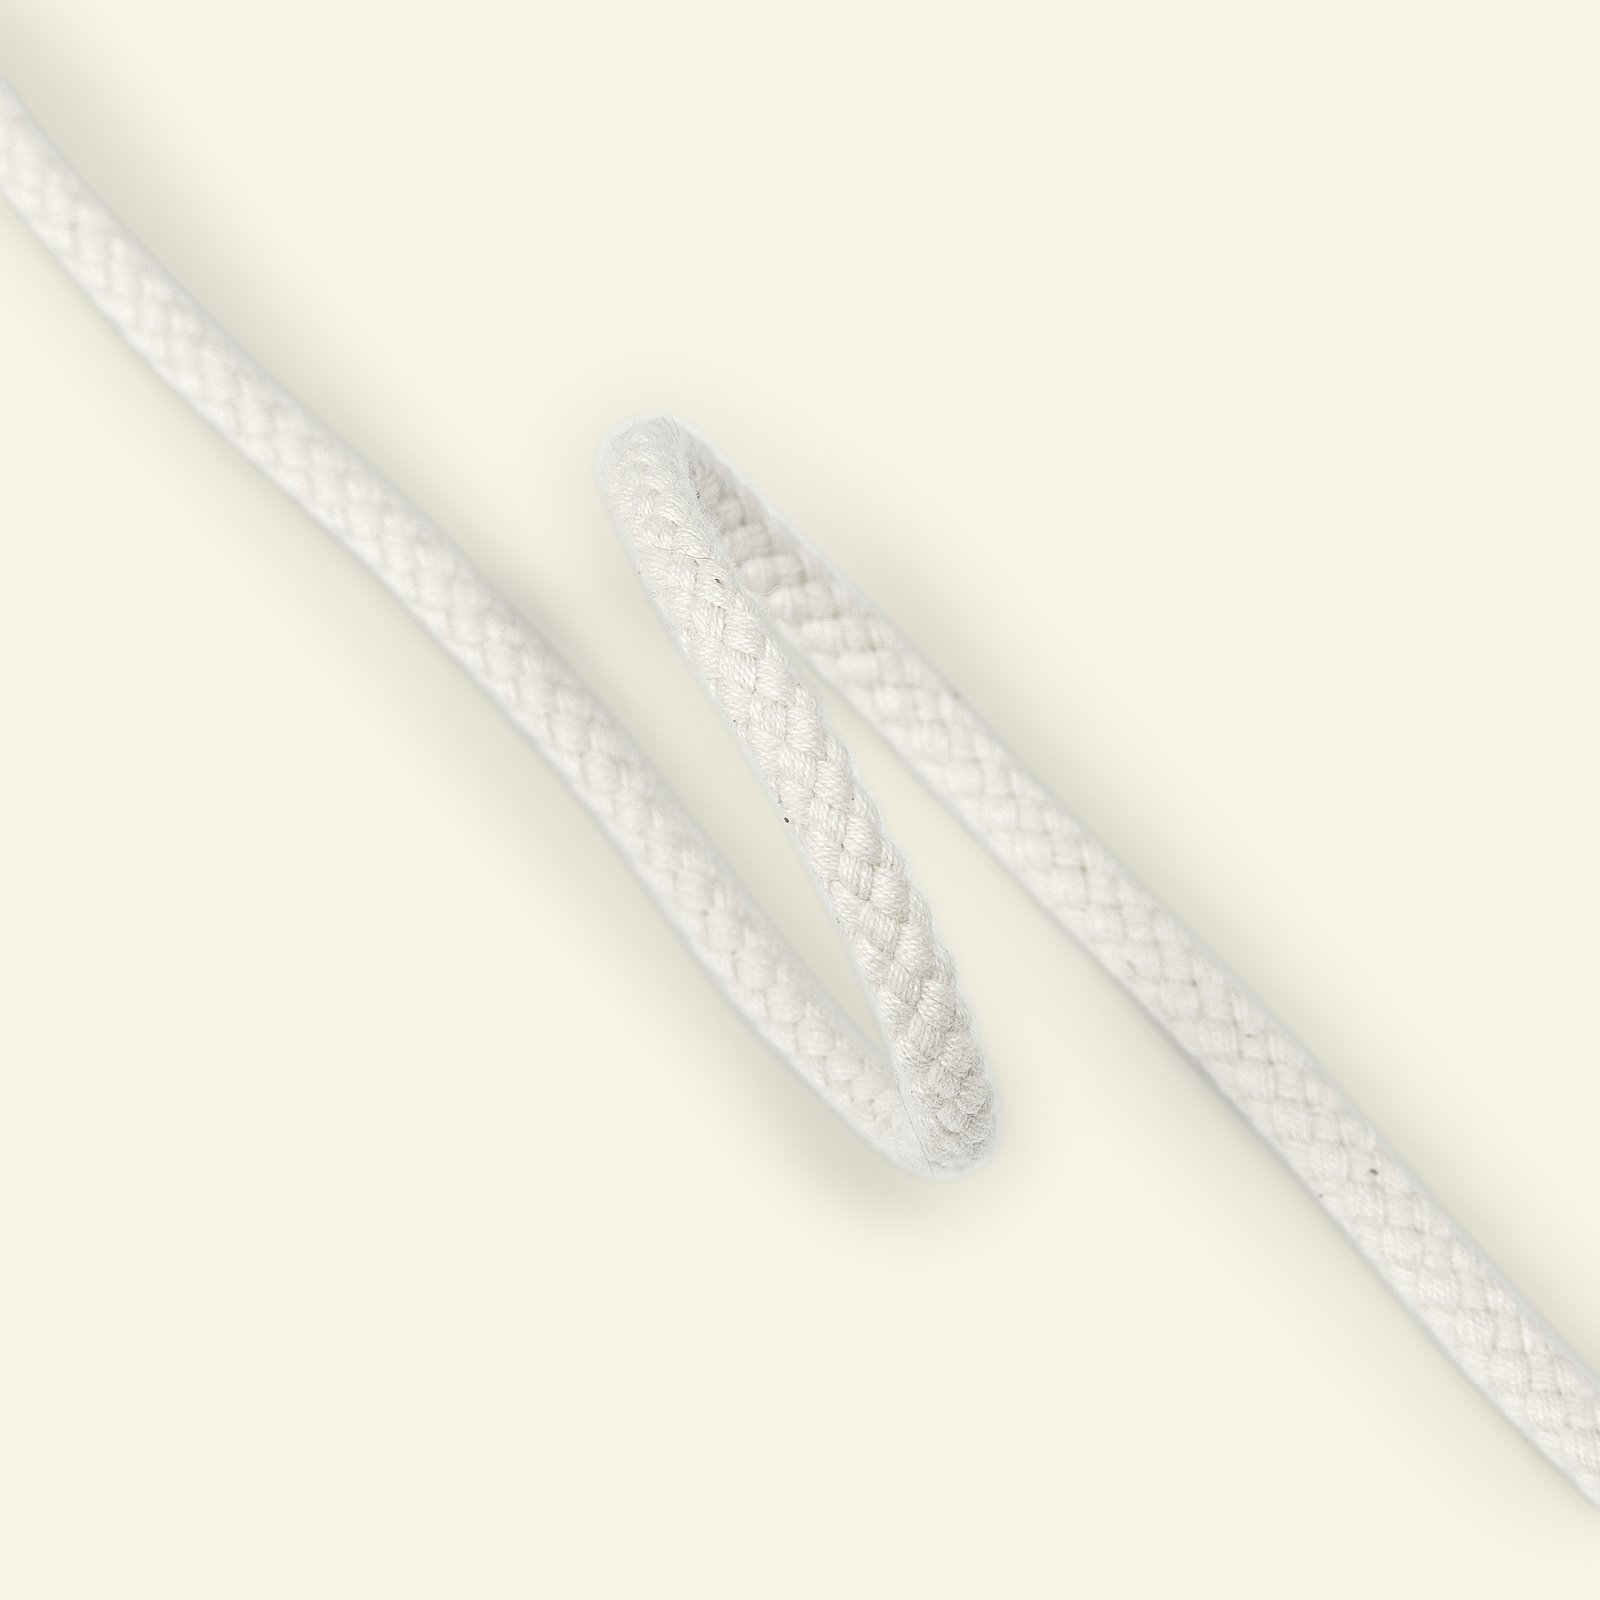 Anorak cord 4,5mm cotton unbleached 5m 75203_pack